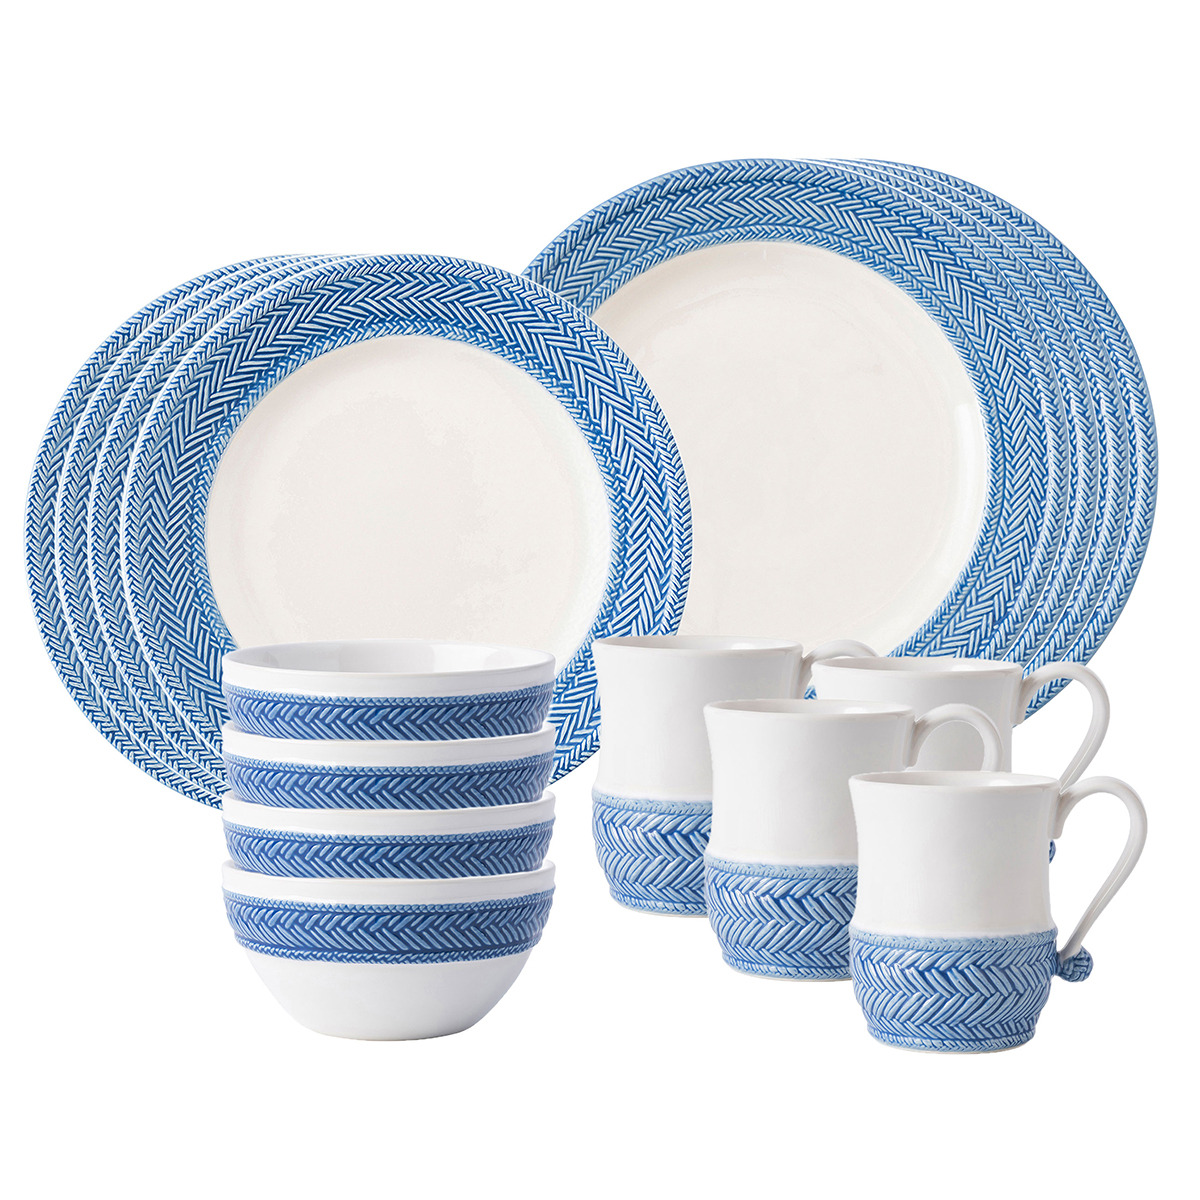 The sophisticated Le Panier 16 piece place setting in delft blue was inspired by the French basket weave often found in equestrian and nautical traditions.